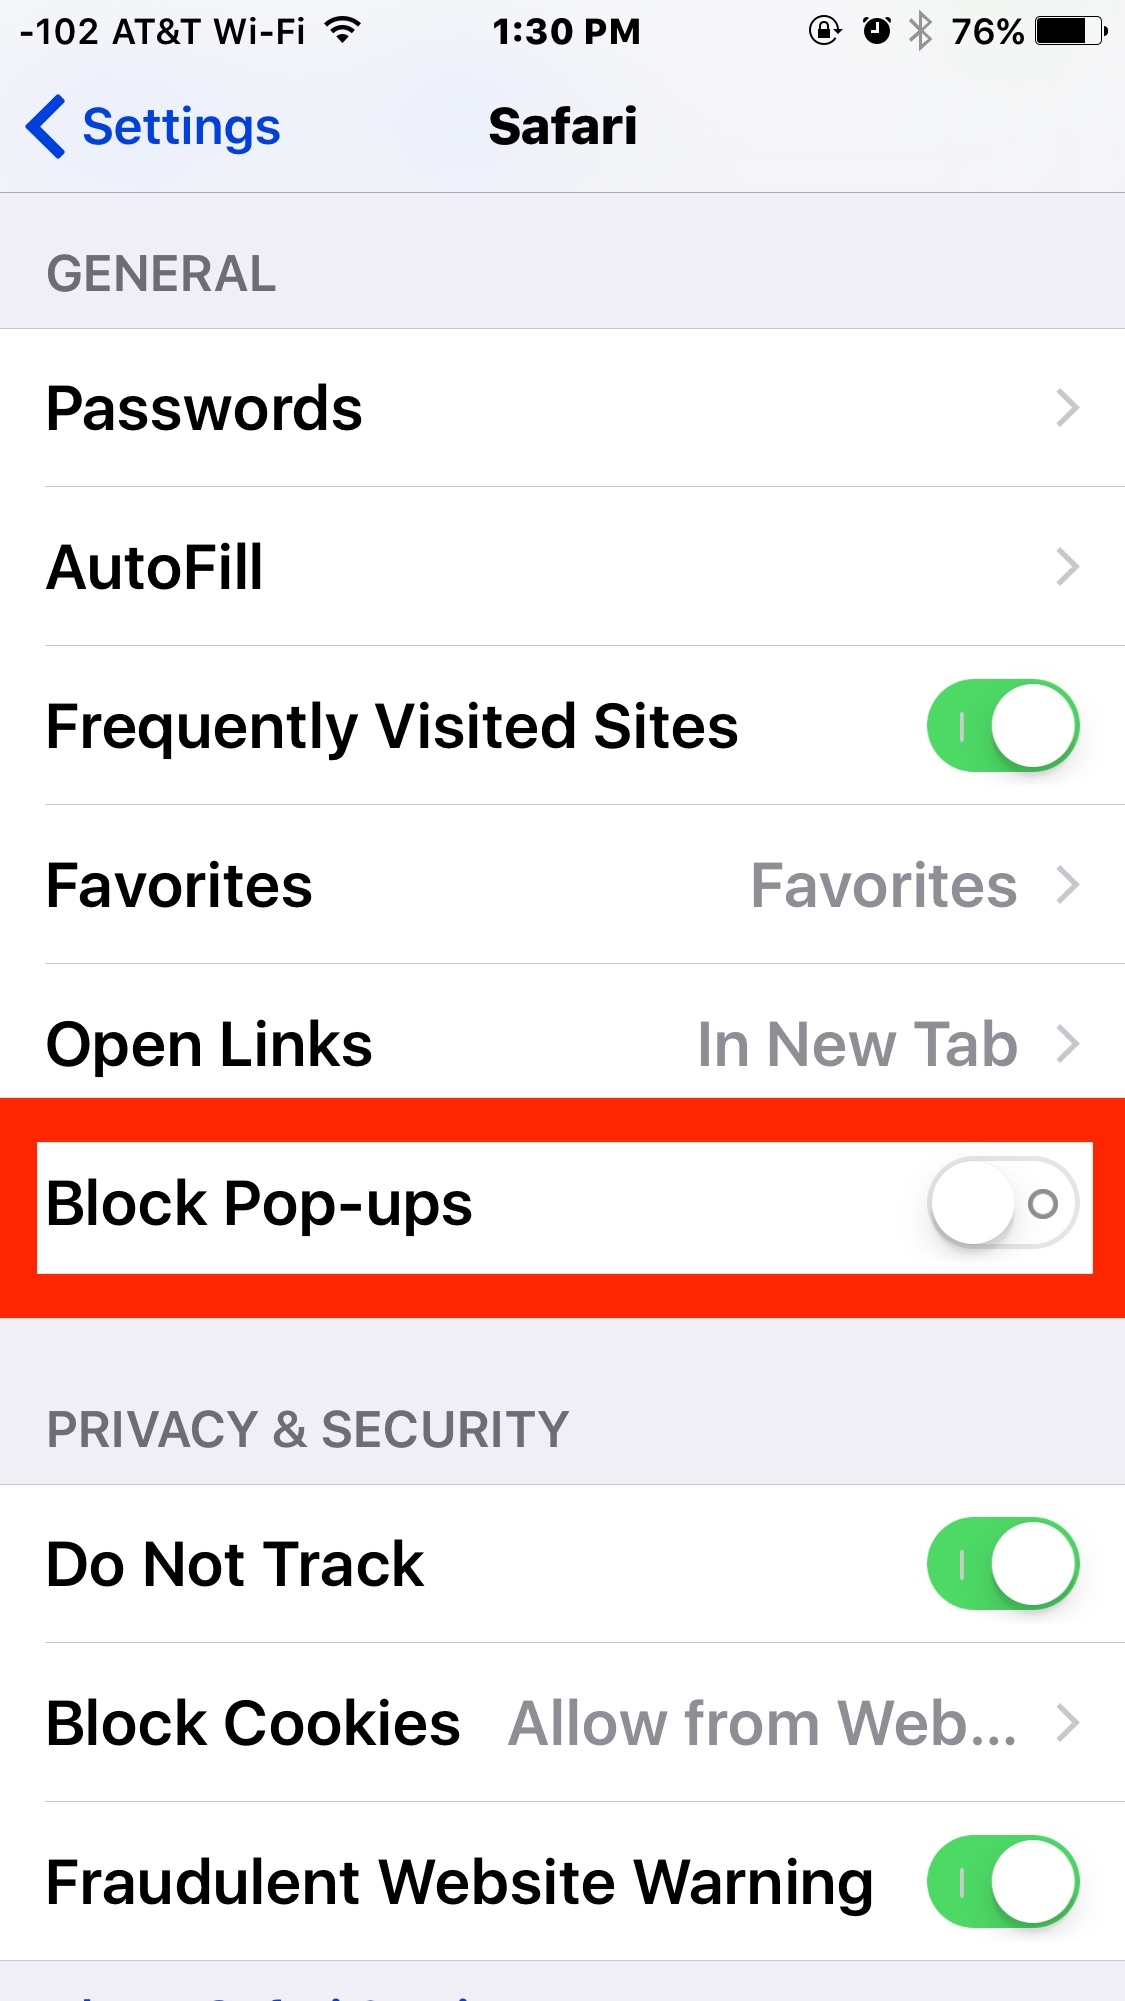 How to disable pop up blocker iphone